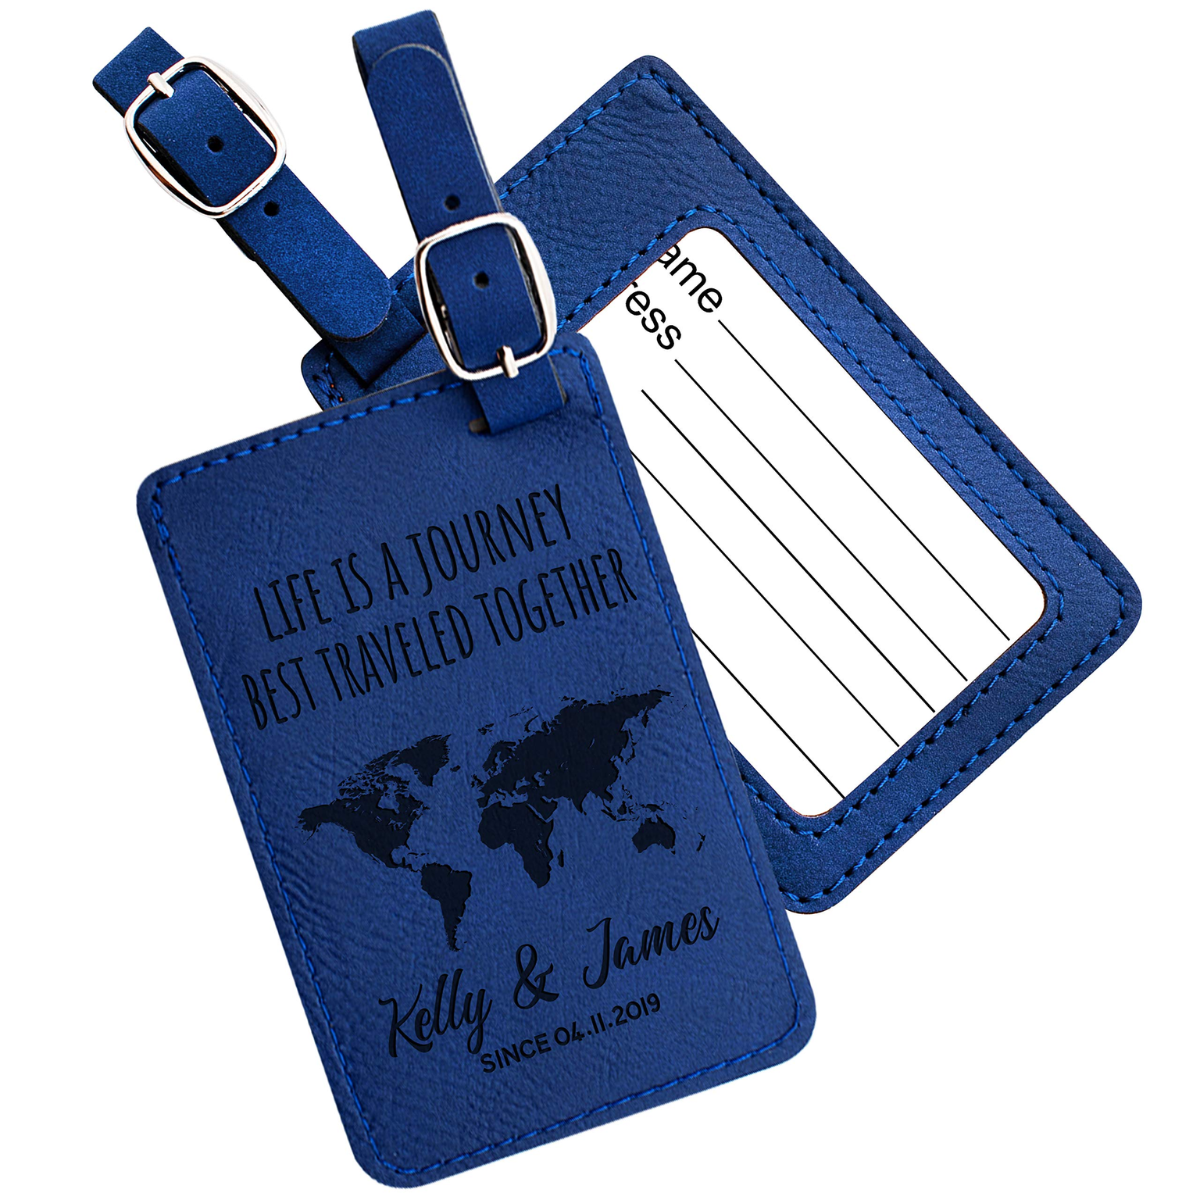 35. Timeless Elegance: Personalized Leather Luggage Tags for a Memorable 3rd Anniversary Gift